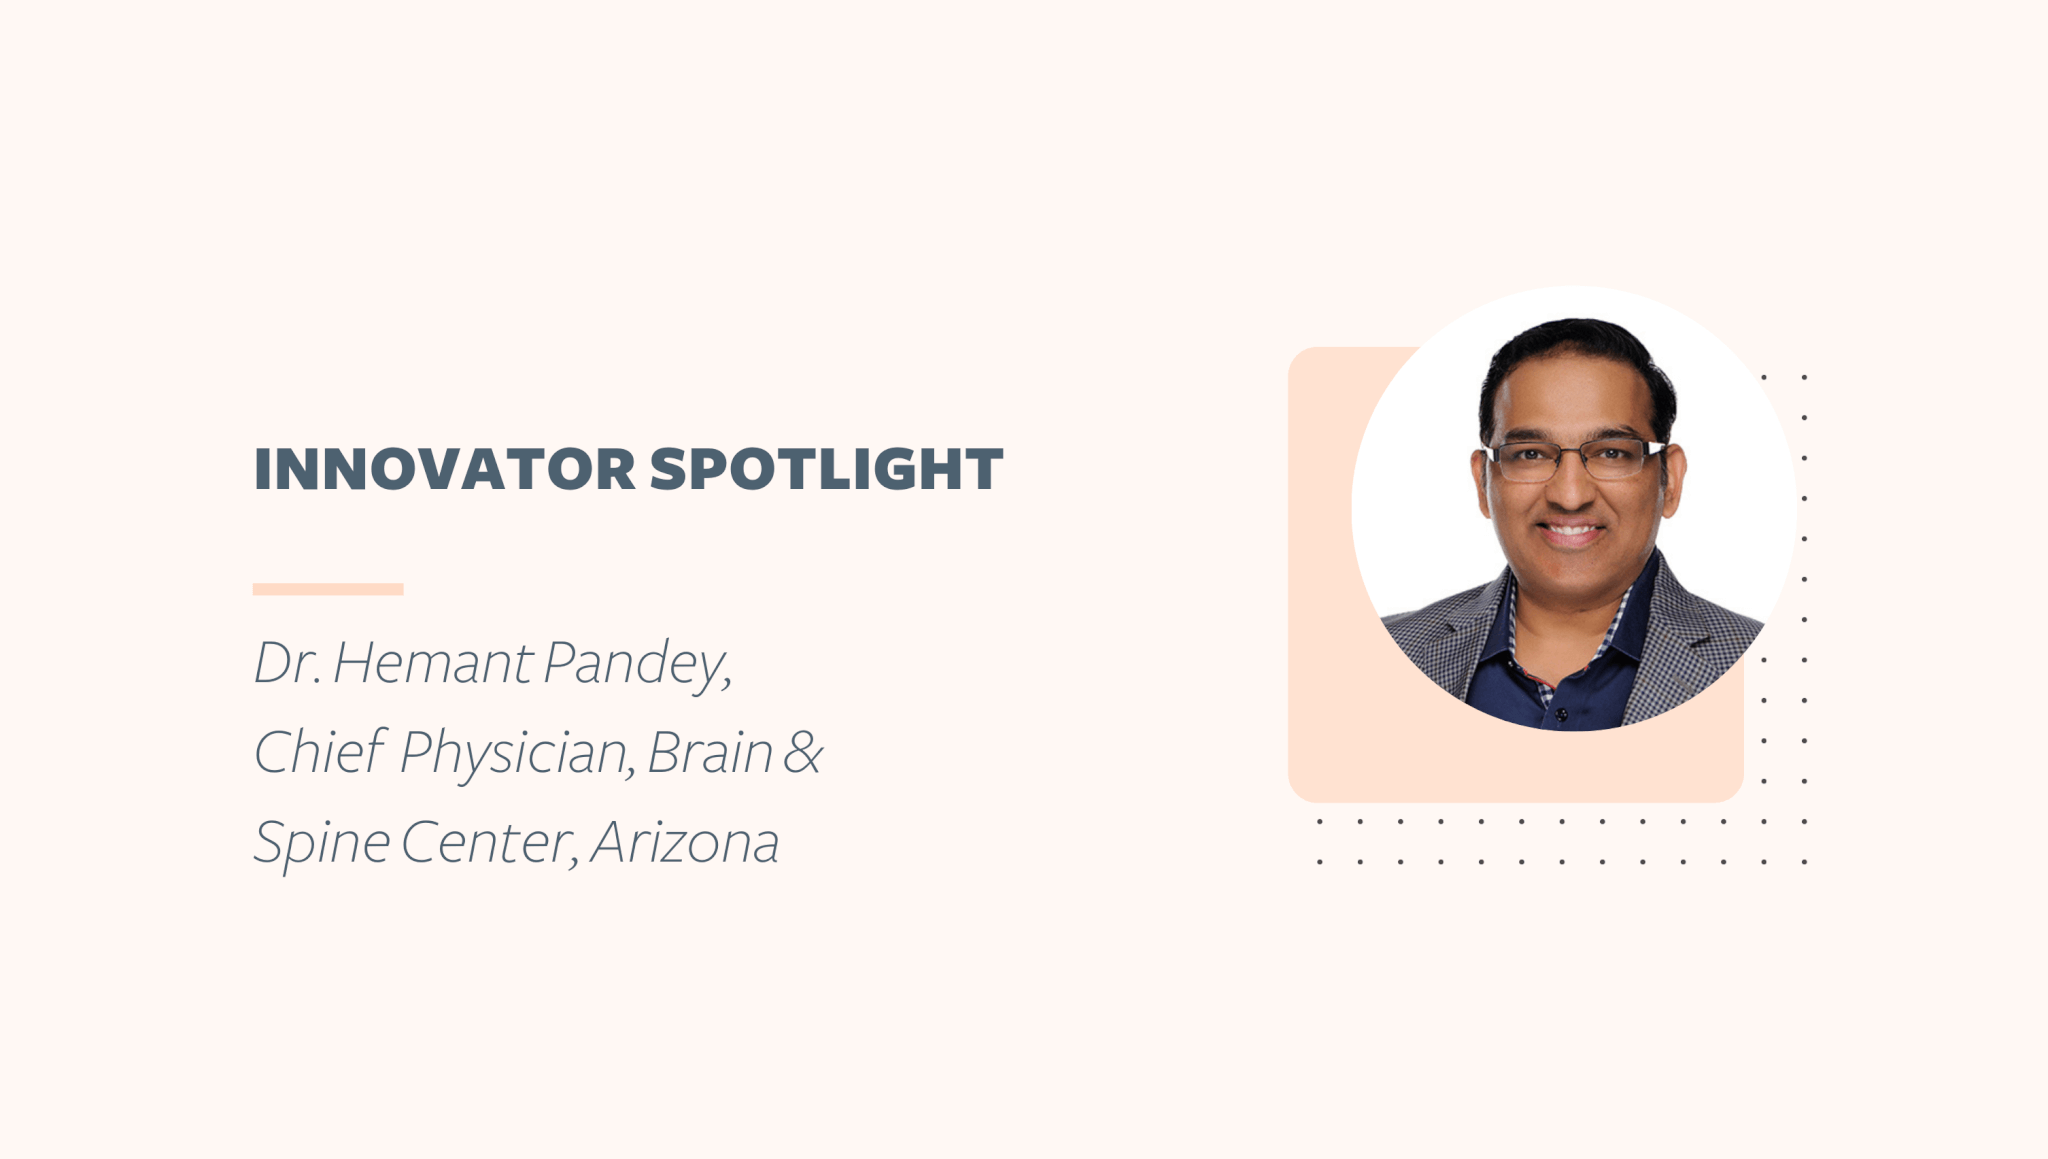 innovator spotlight with a headshot of dr. hemant pandey, chief physician at brain and spine center arizona